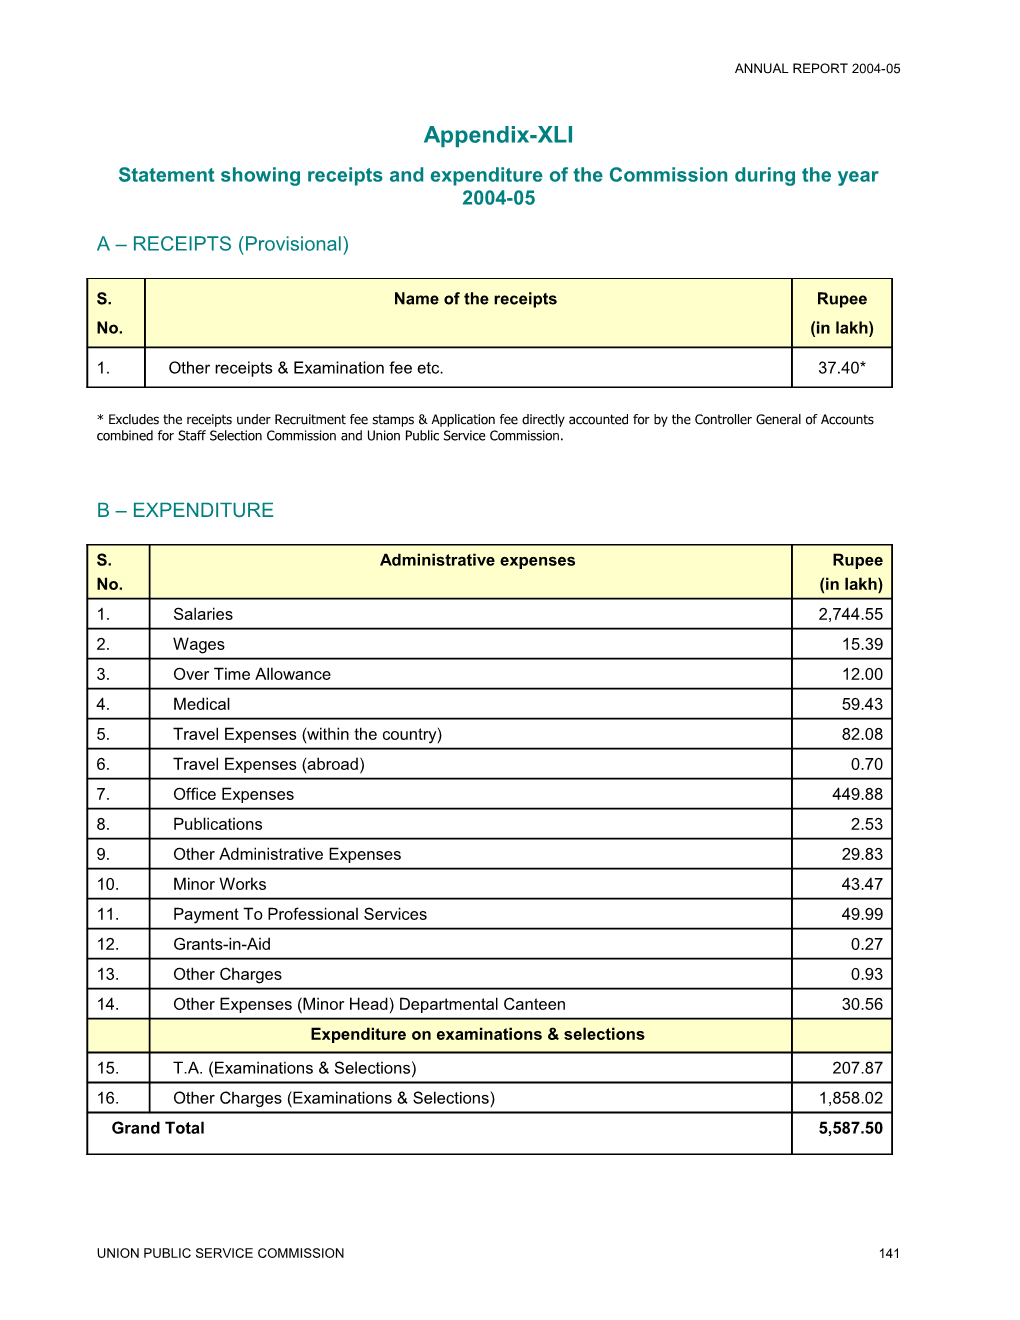 Statement Showing Receipts and Expenditure of the Commission During the Year 2004-05